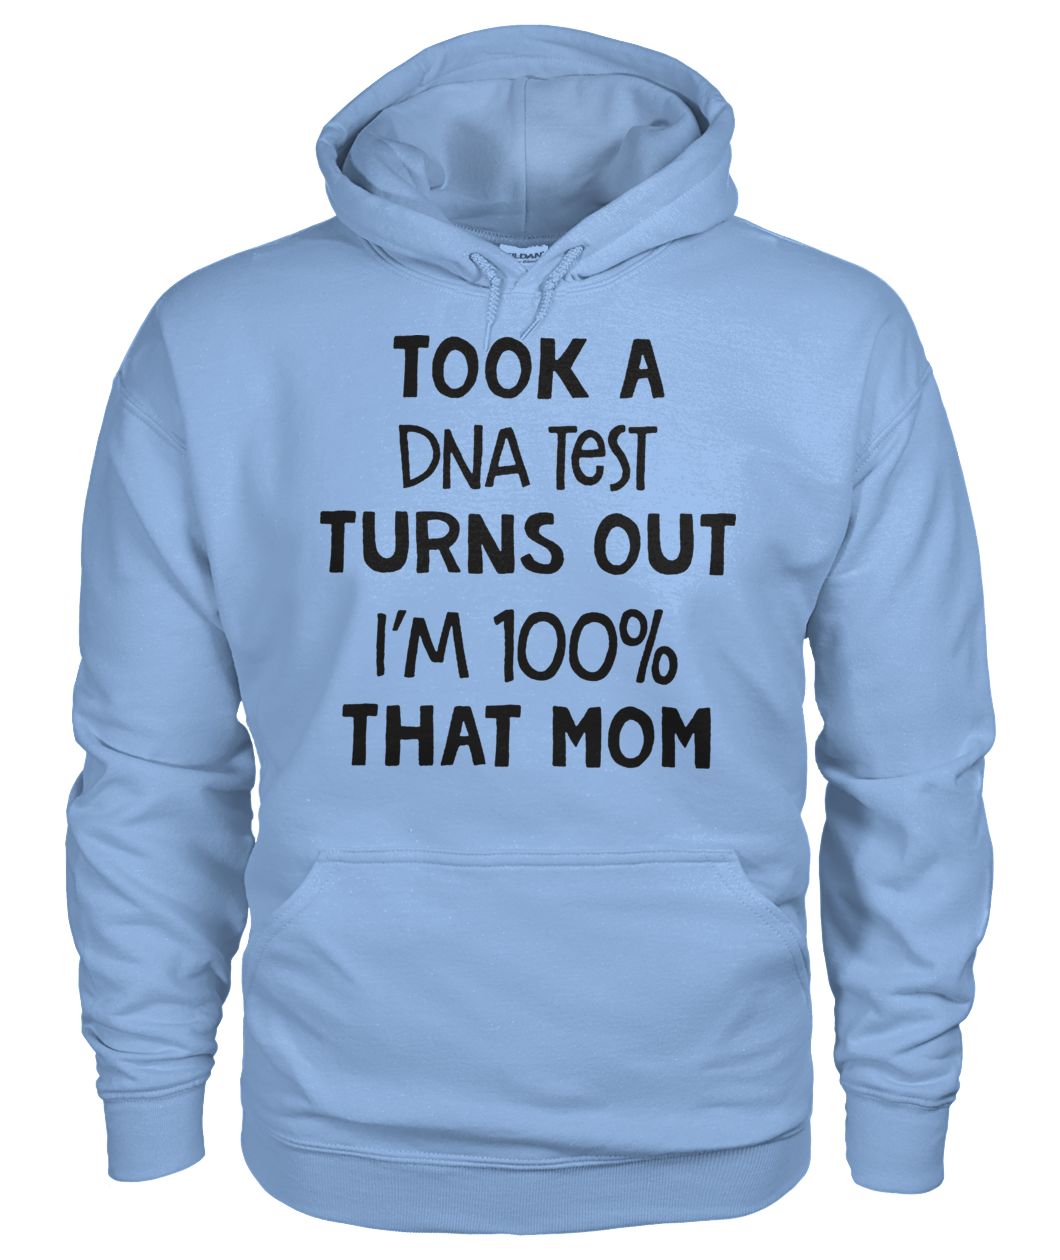 Took a dna test turns out I'm 100% that mom gildan hoodie